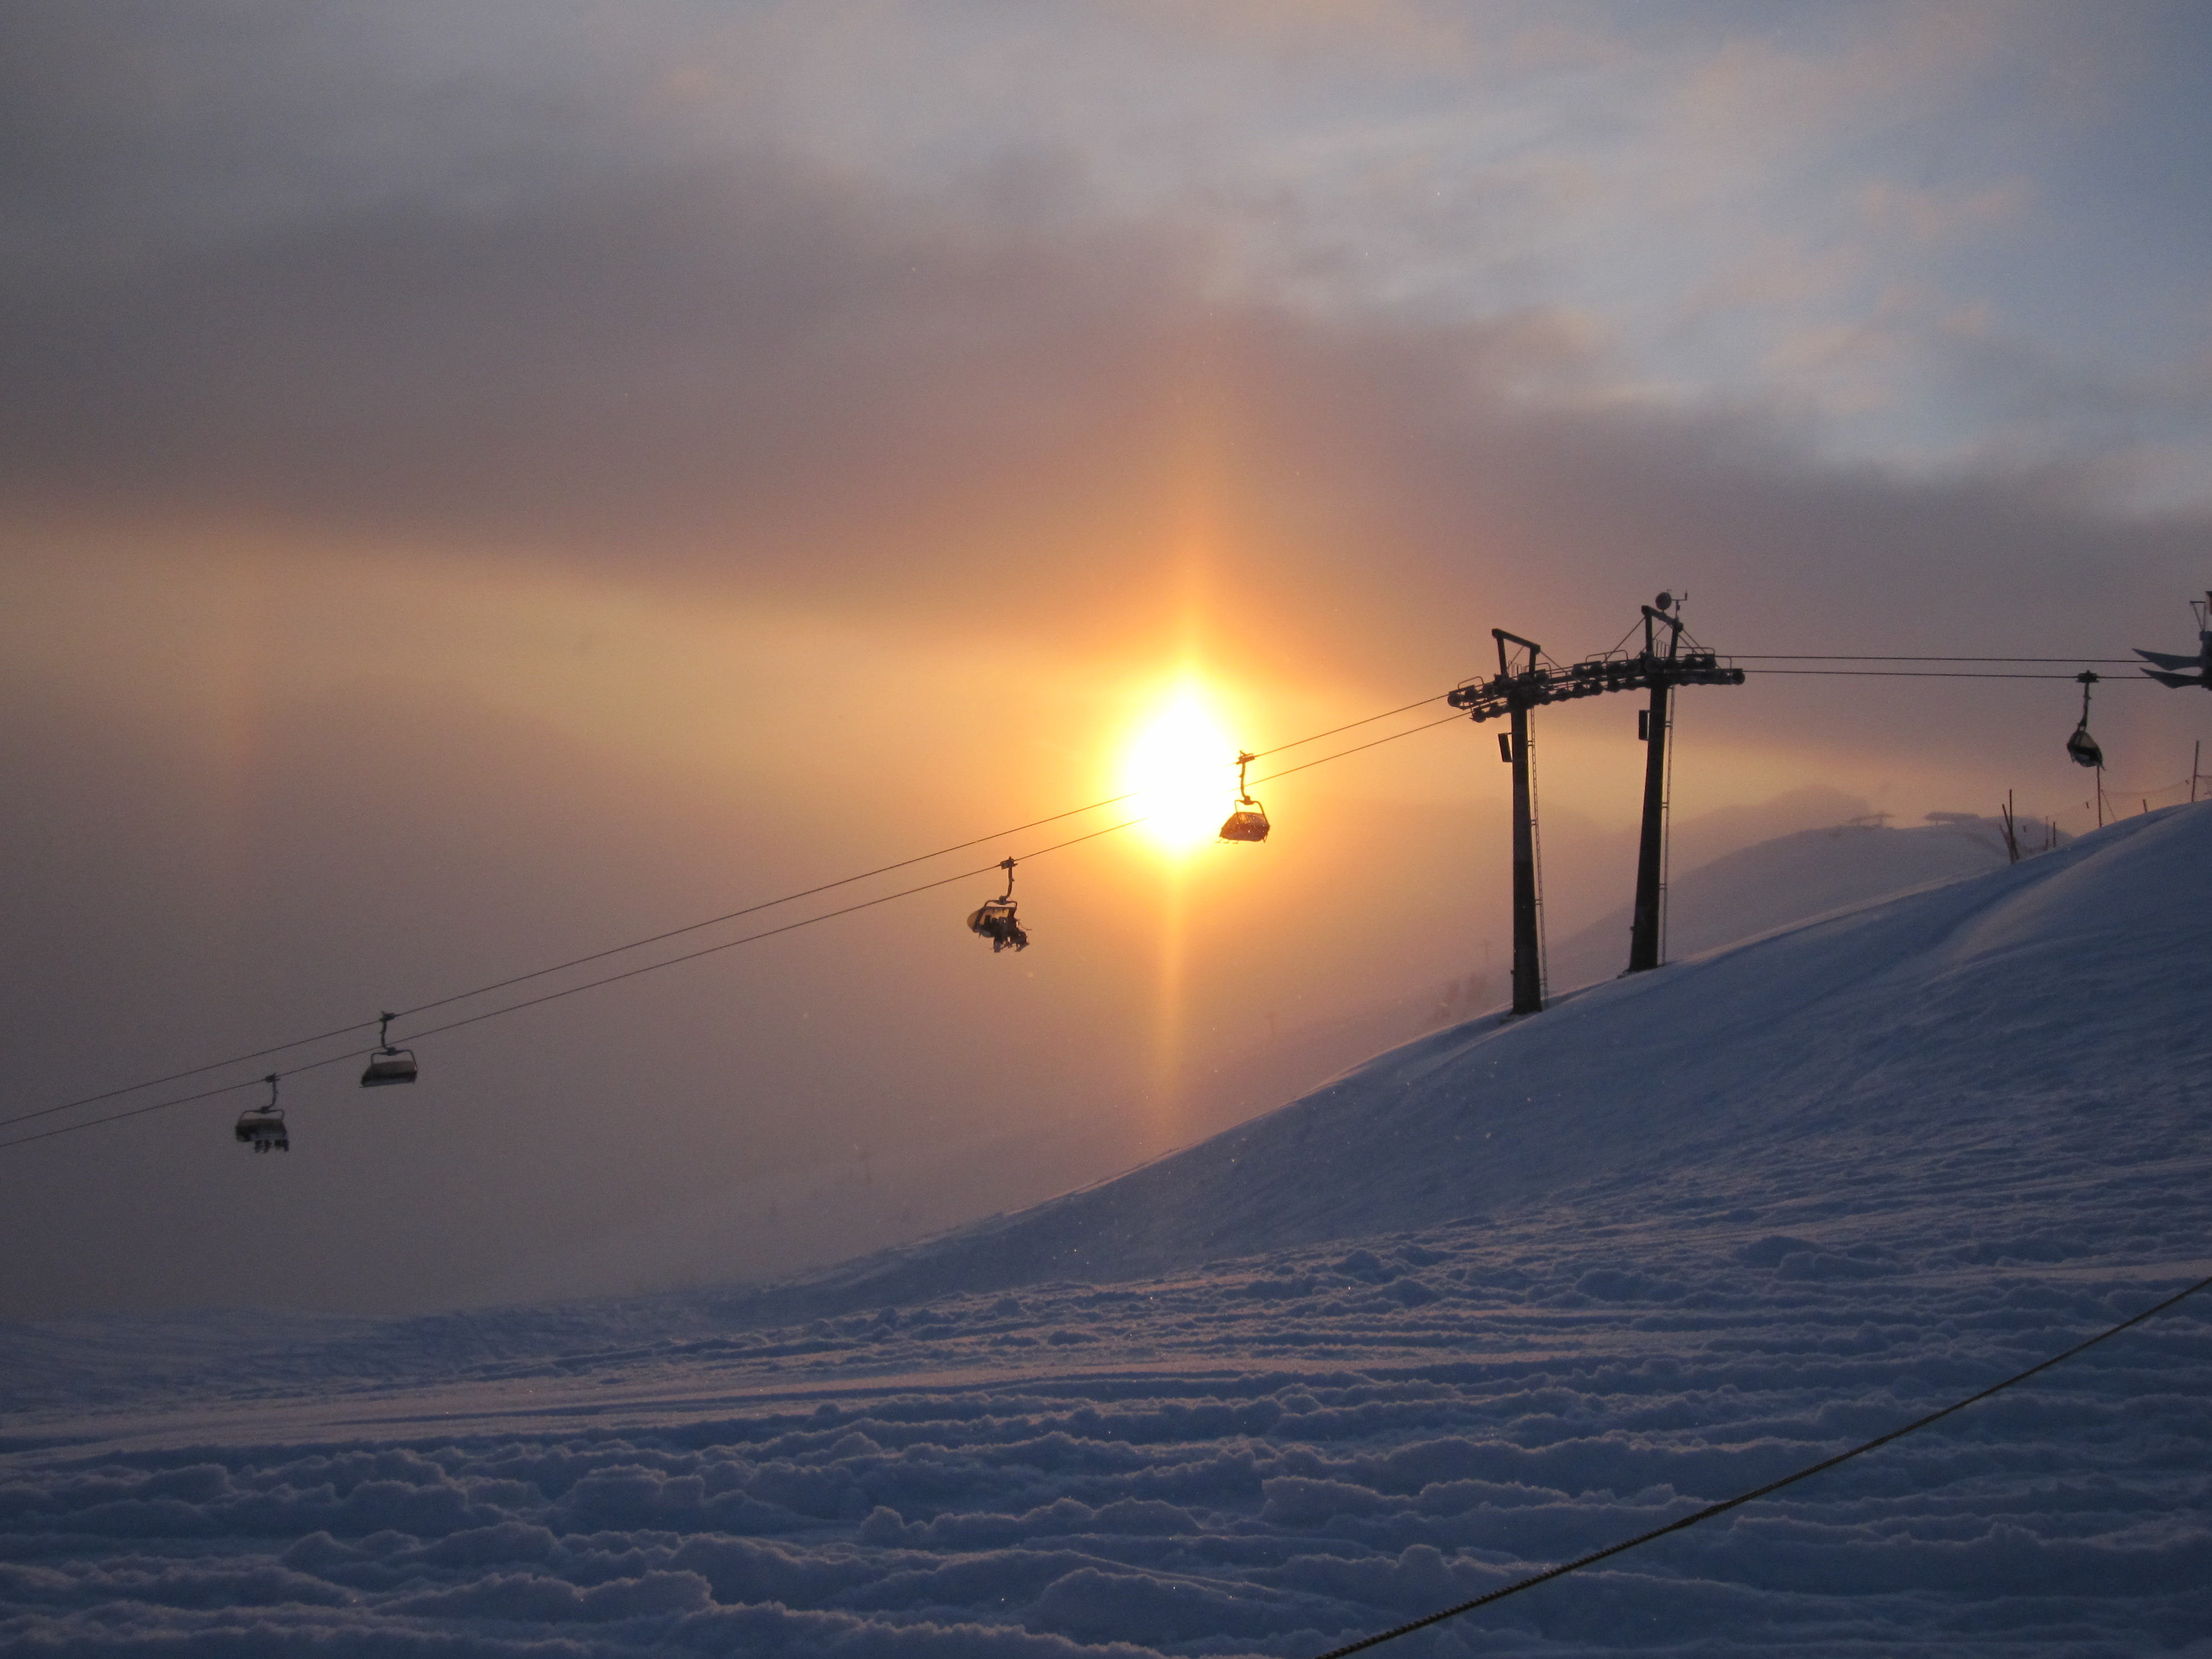 Chairlift and sunset in Saalbach